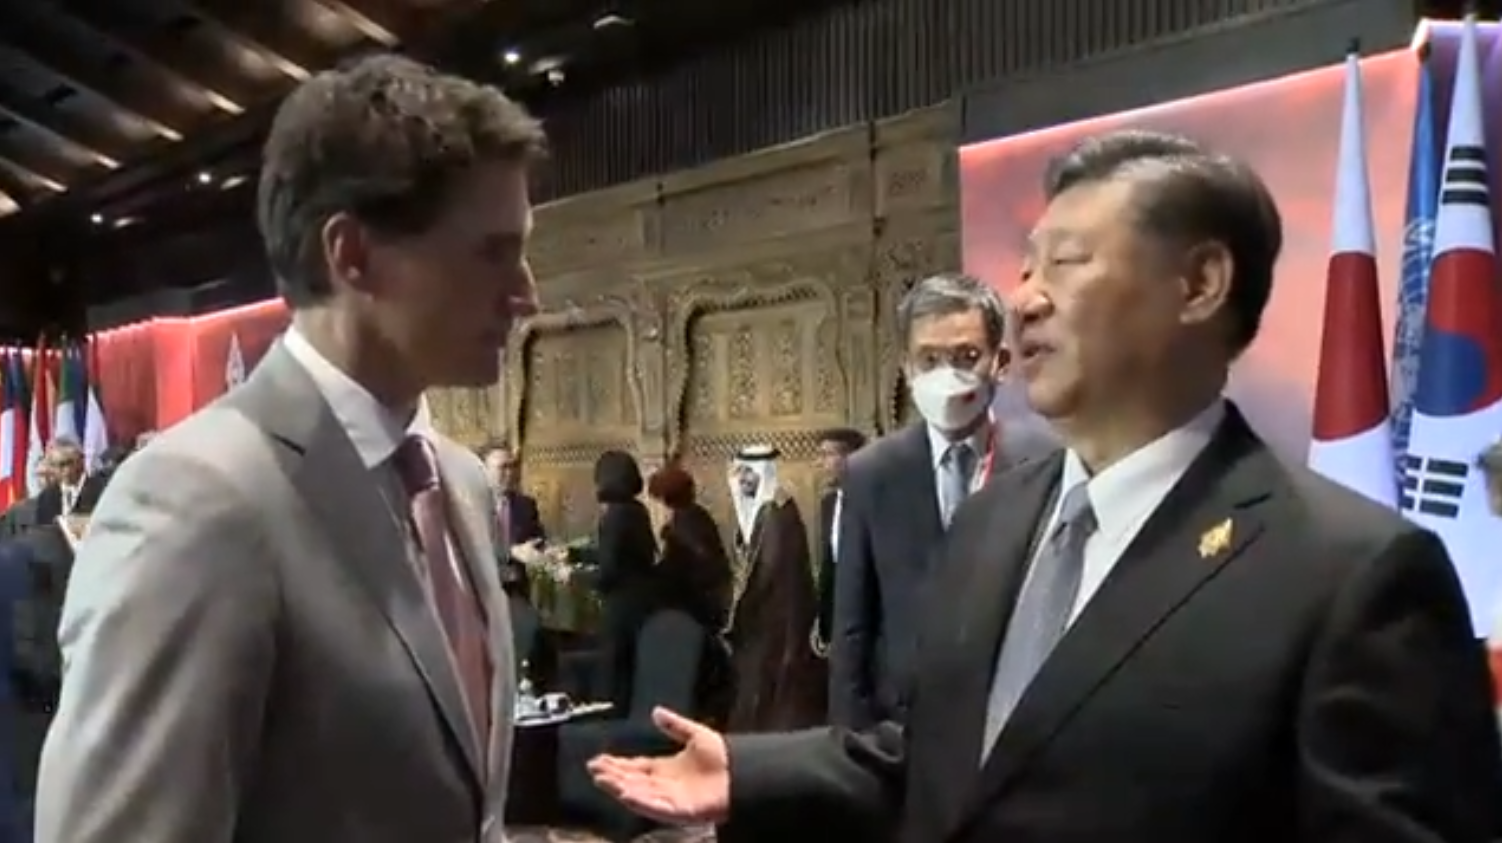 Xi Jinping Scolds Justin Trudeau Like a School Boy – Calls Him Out in Front of Cameras for Leaking Their Convo to Reporters (VIDEO)